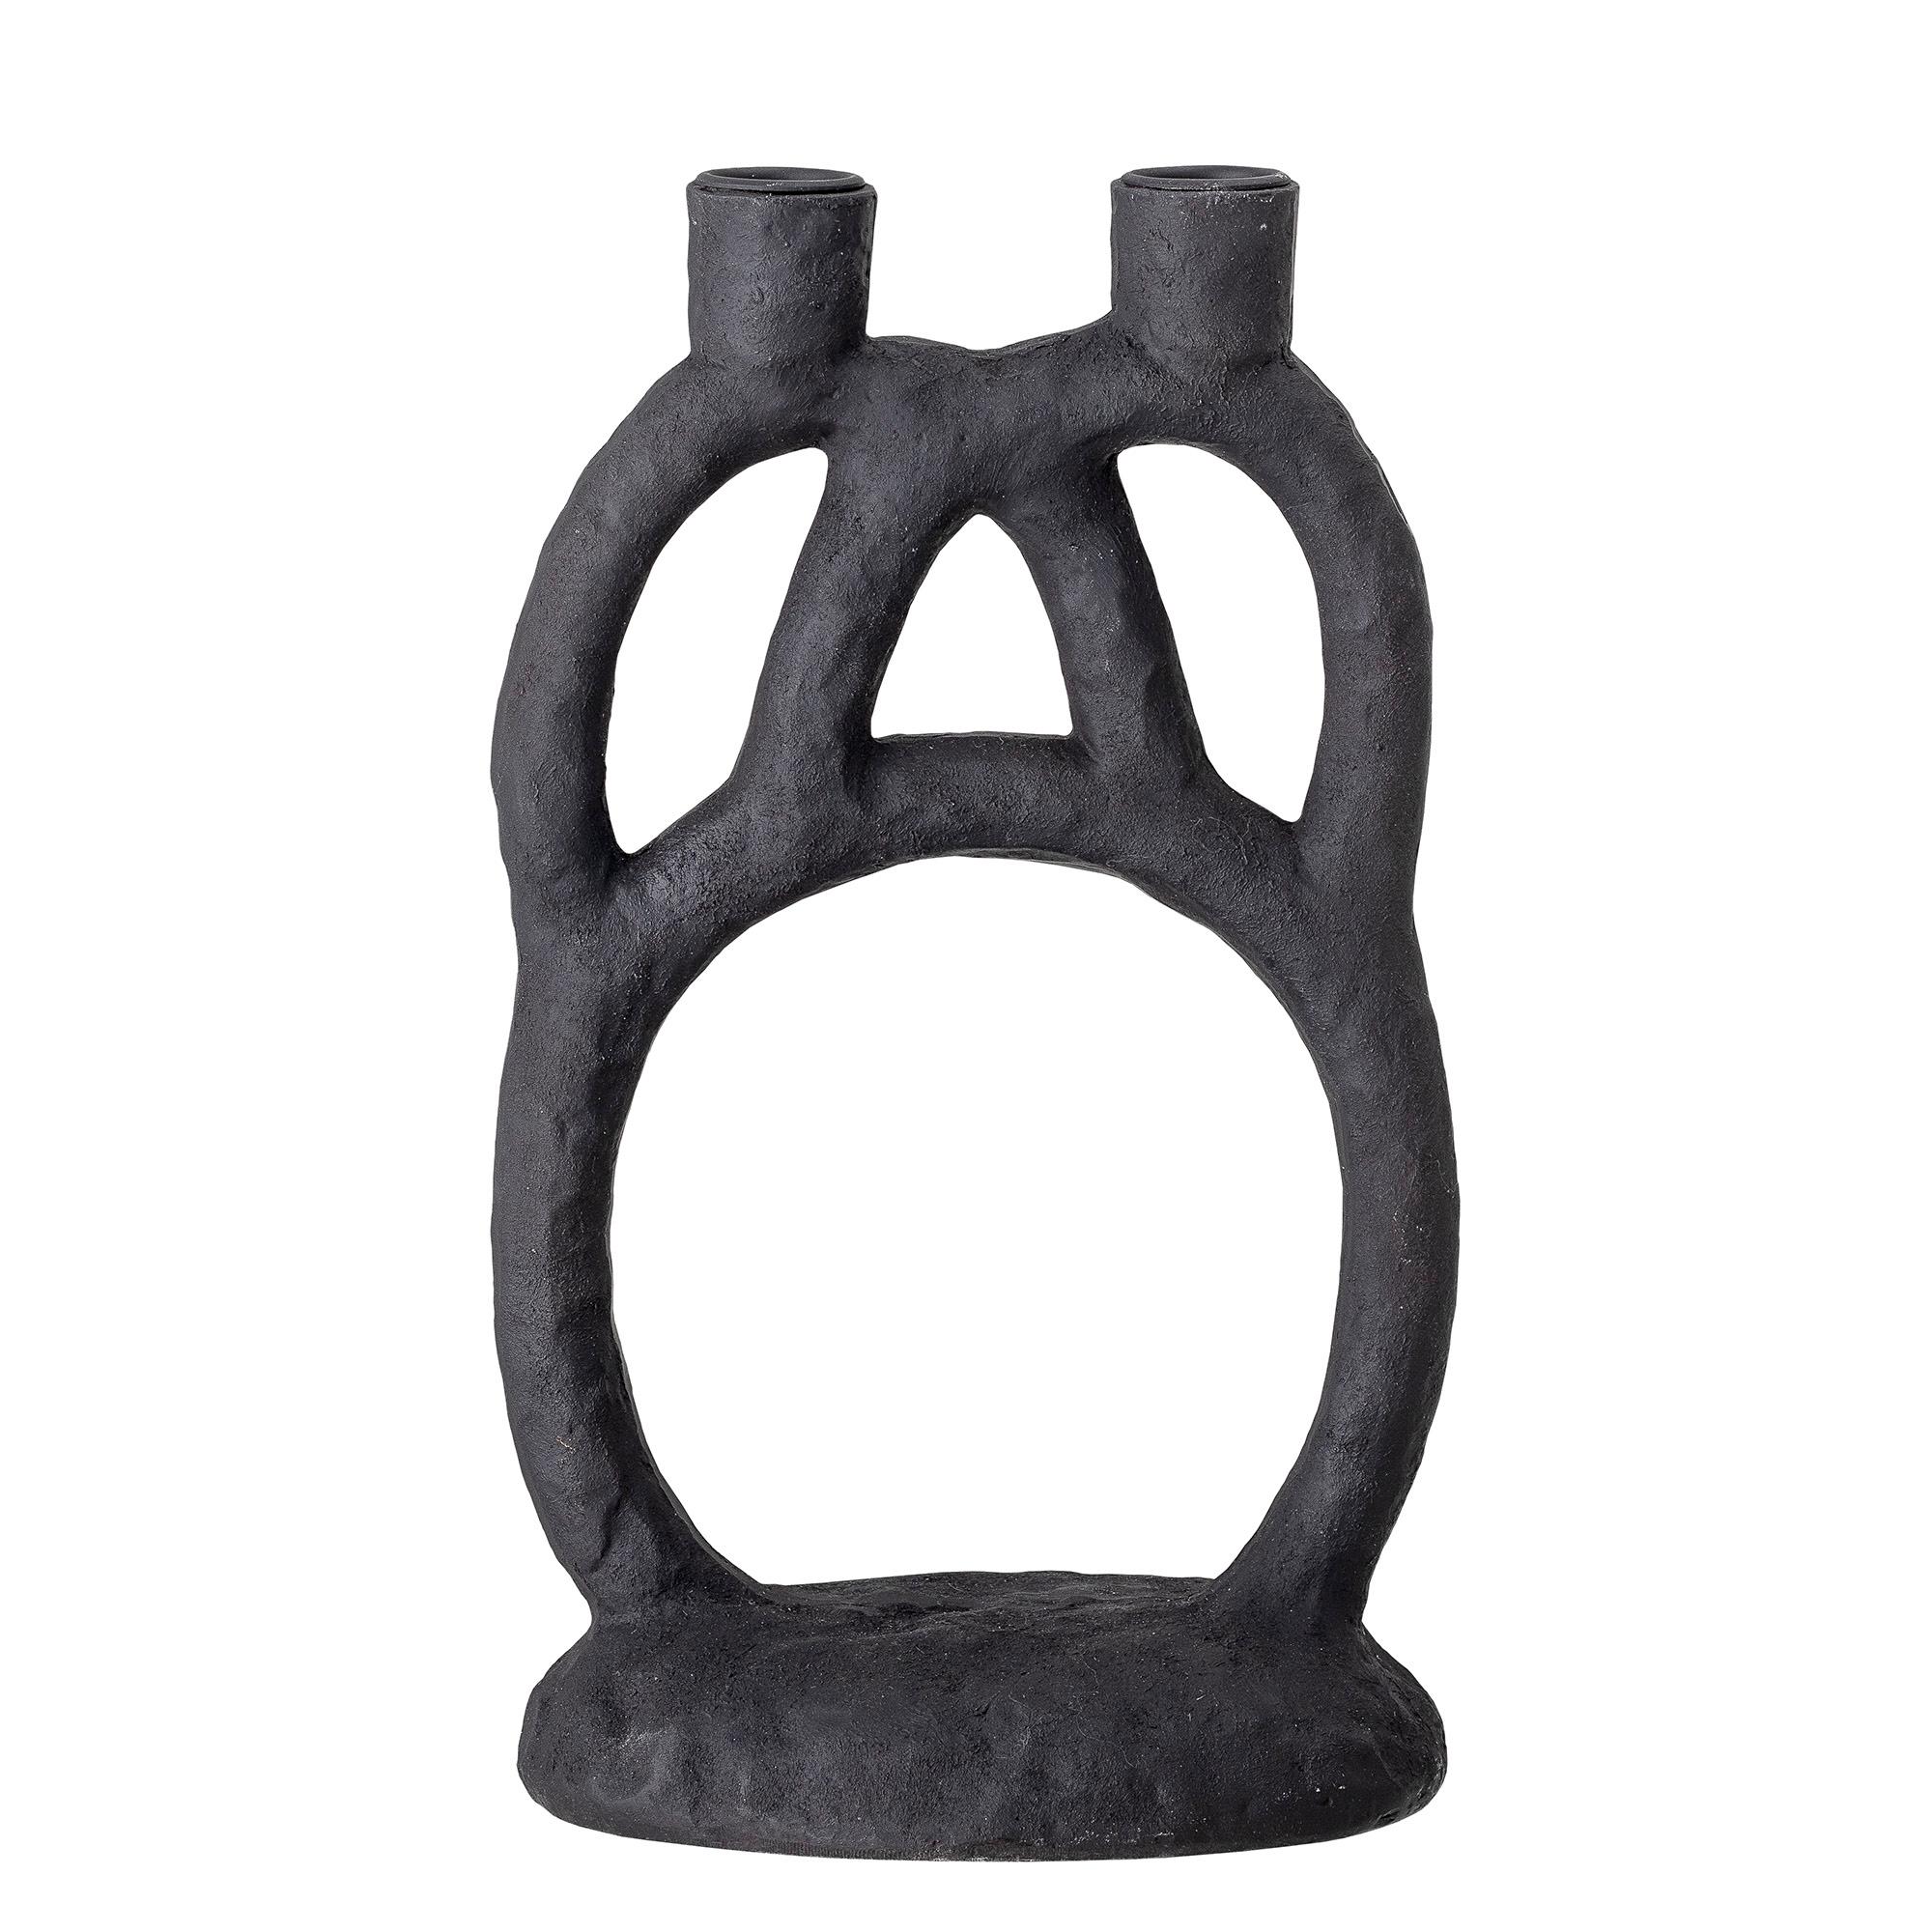 Hand-sculpted black poly resin Brutalist style double stick candleholder.